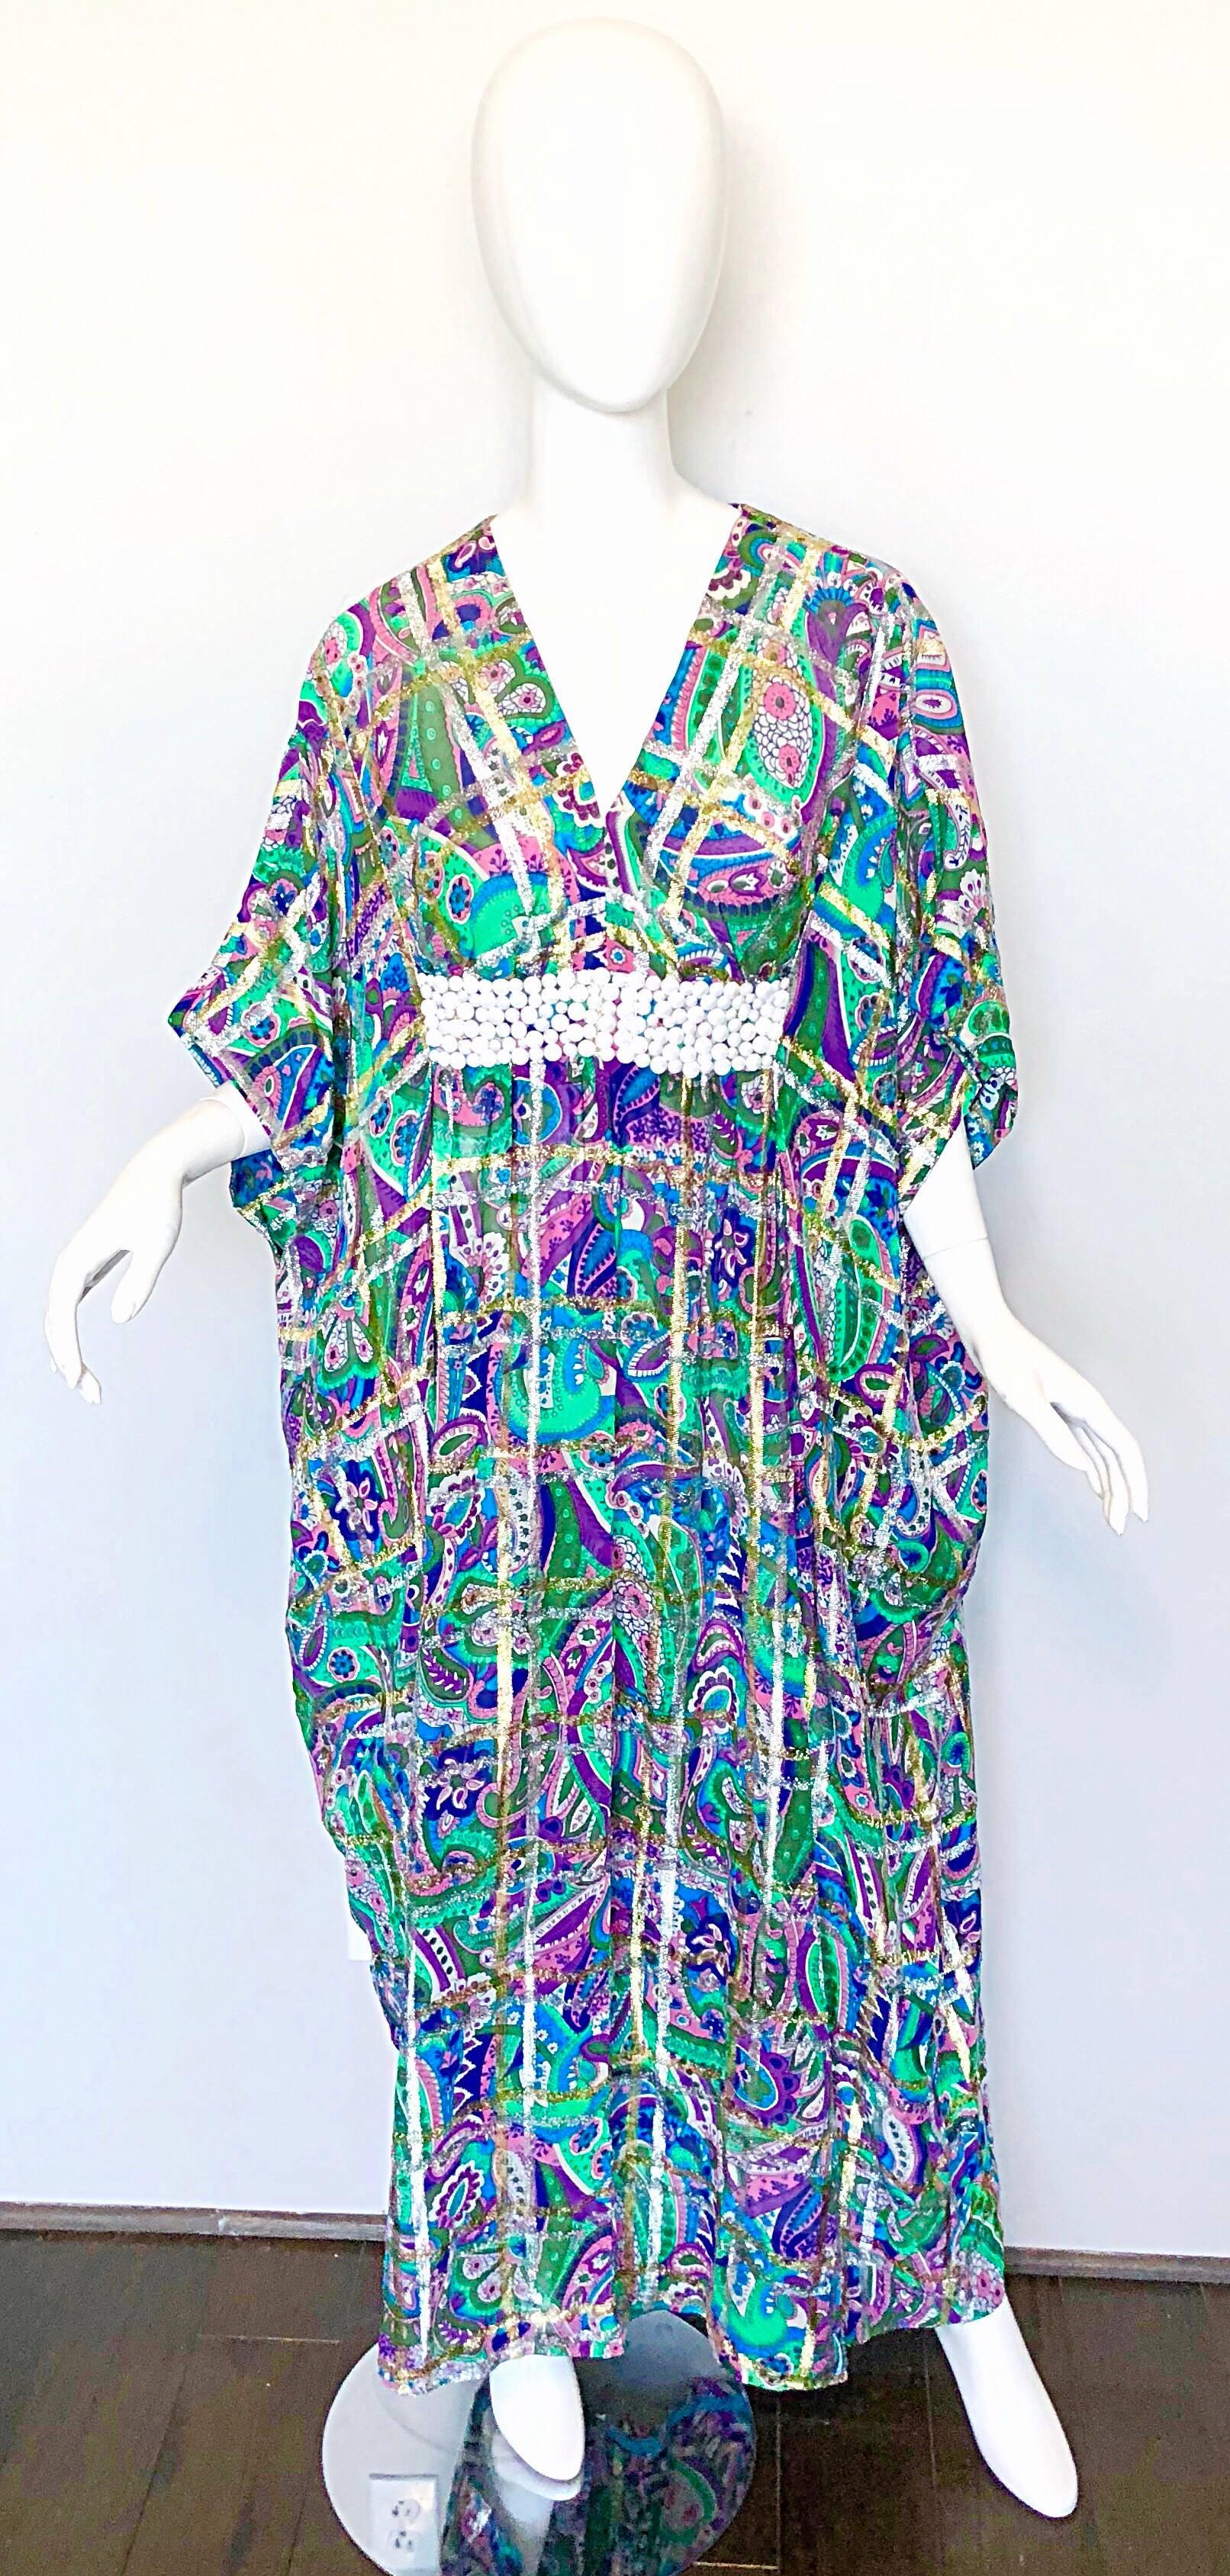 AMAZING 70s silk chiffon beaded kaftan / maxi dress! Features a wonderful paisley mixed media print. Vibrant colors of purple, blue, green, pink, fuchsia, turquoise, teal, and white. Stripes in metallic gold and silver throughout. Hand-sewn white